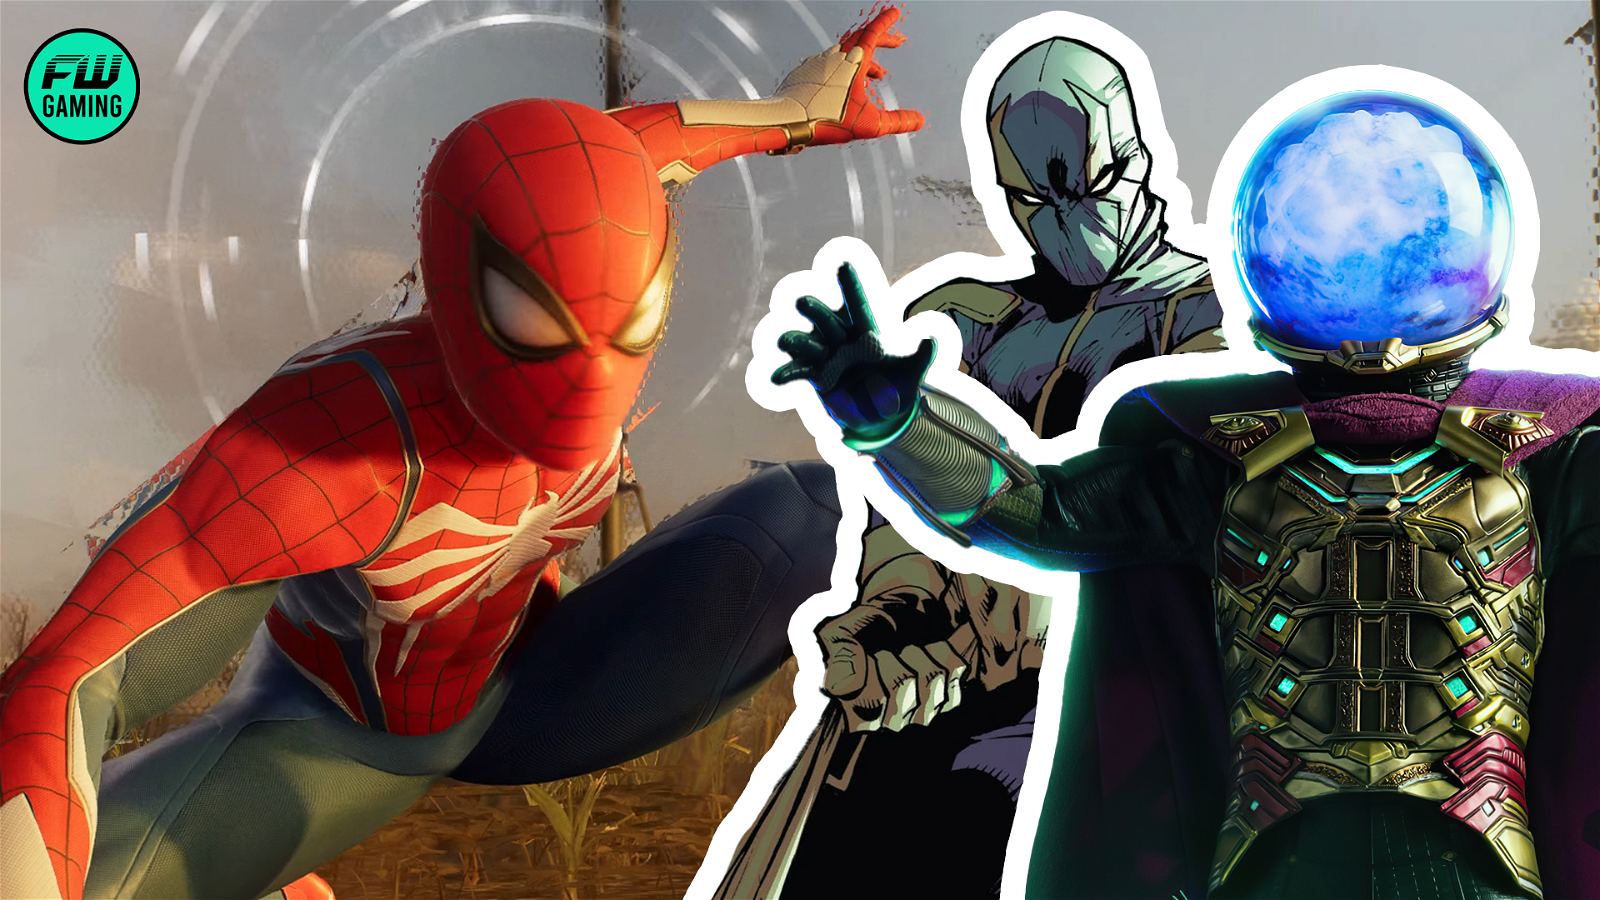 to a climactic Showdown with Marvel villains not yet seen in this Spider-Man  universe: Marvel's Spider-Man 2 Teased to Have All New Villains Never  Before Featured or Fought - Who are They?